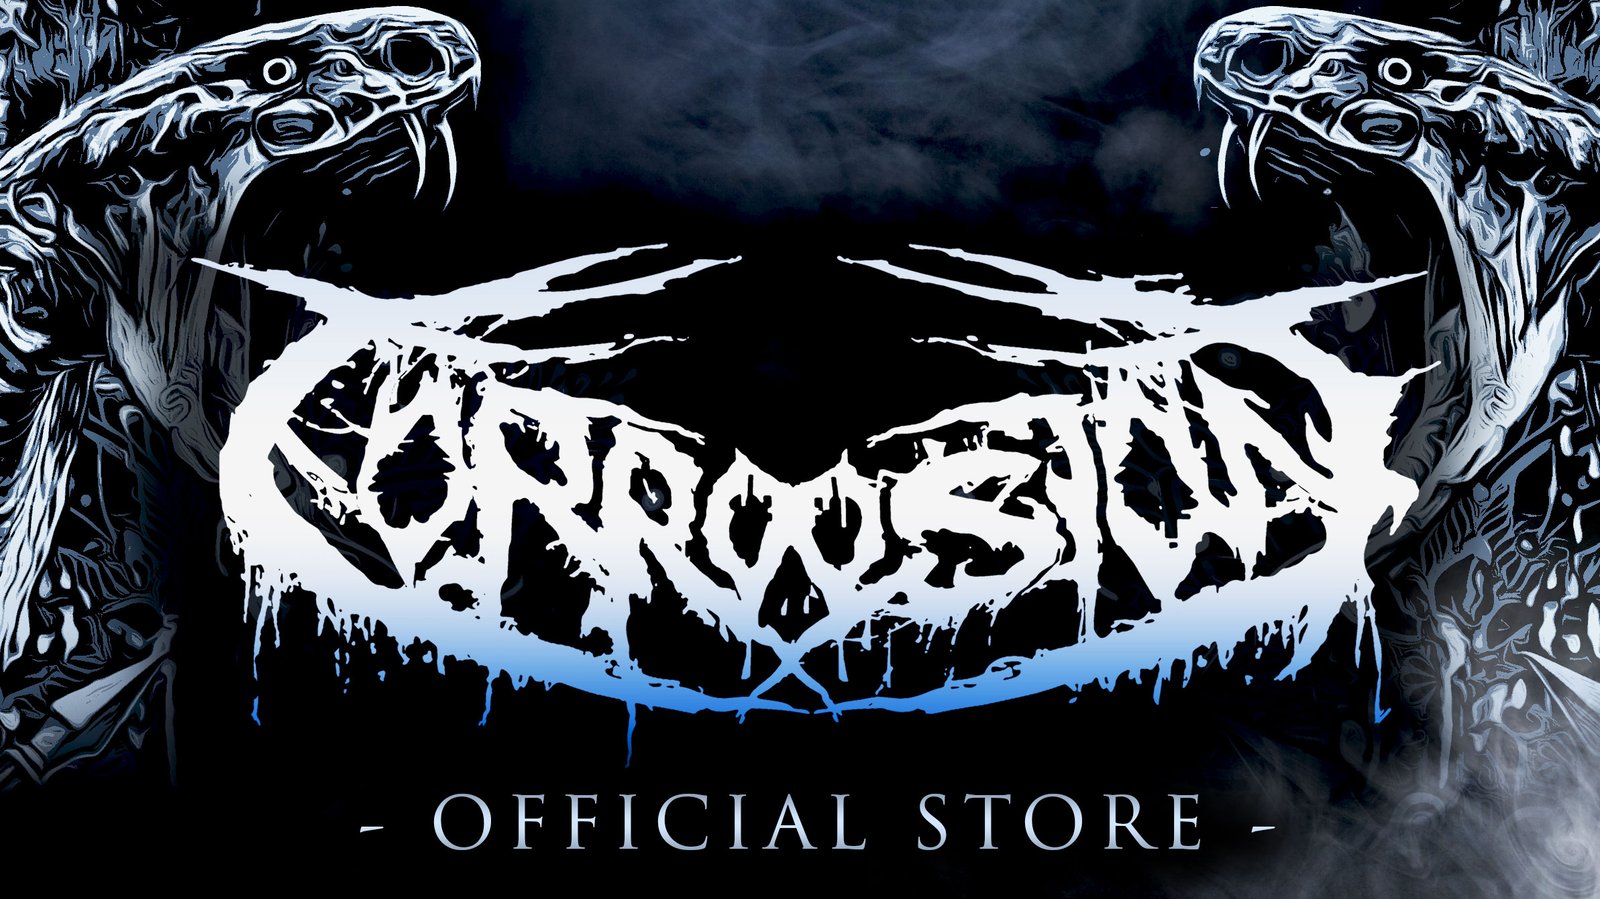 Corroosion Store